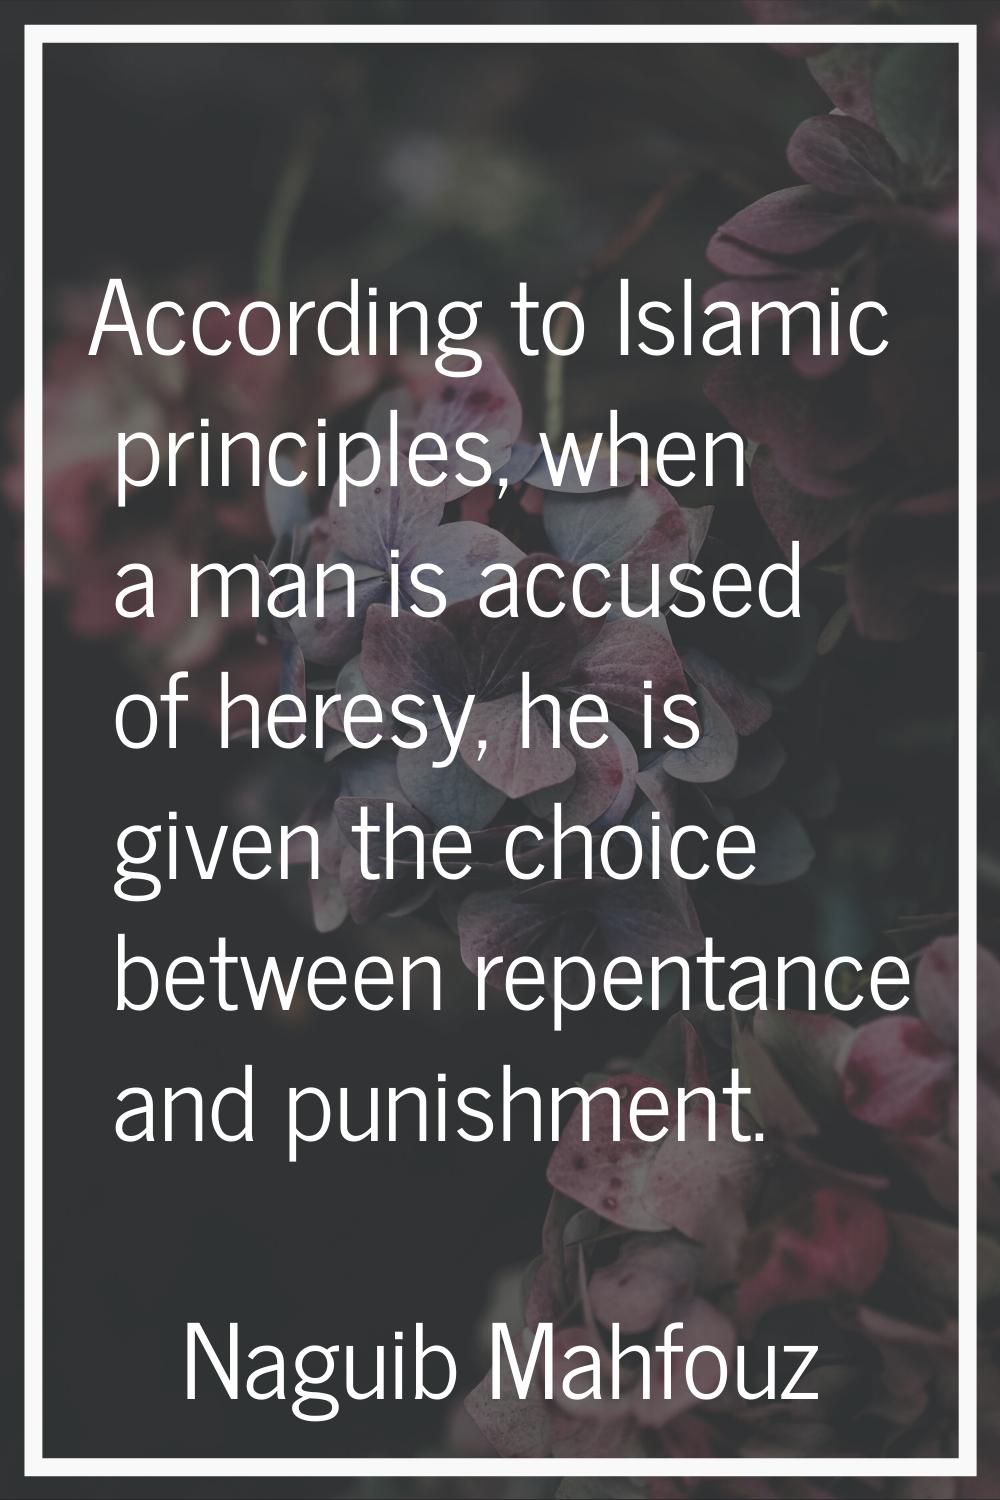 According to Islamic principles, when a man is accused of heresy, he is given the choice between re